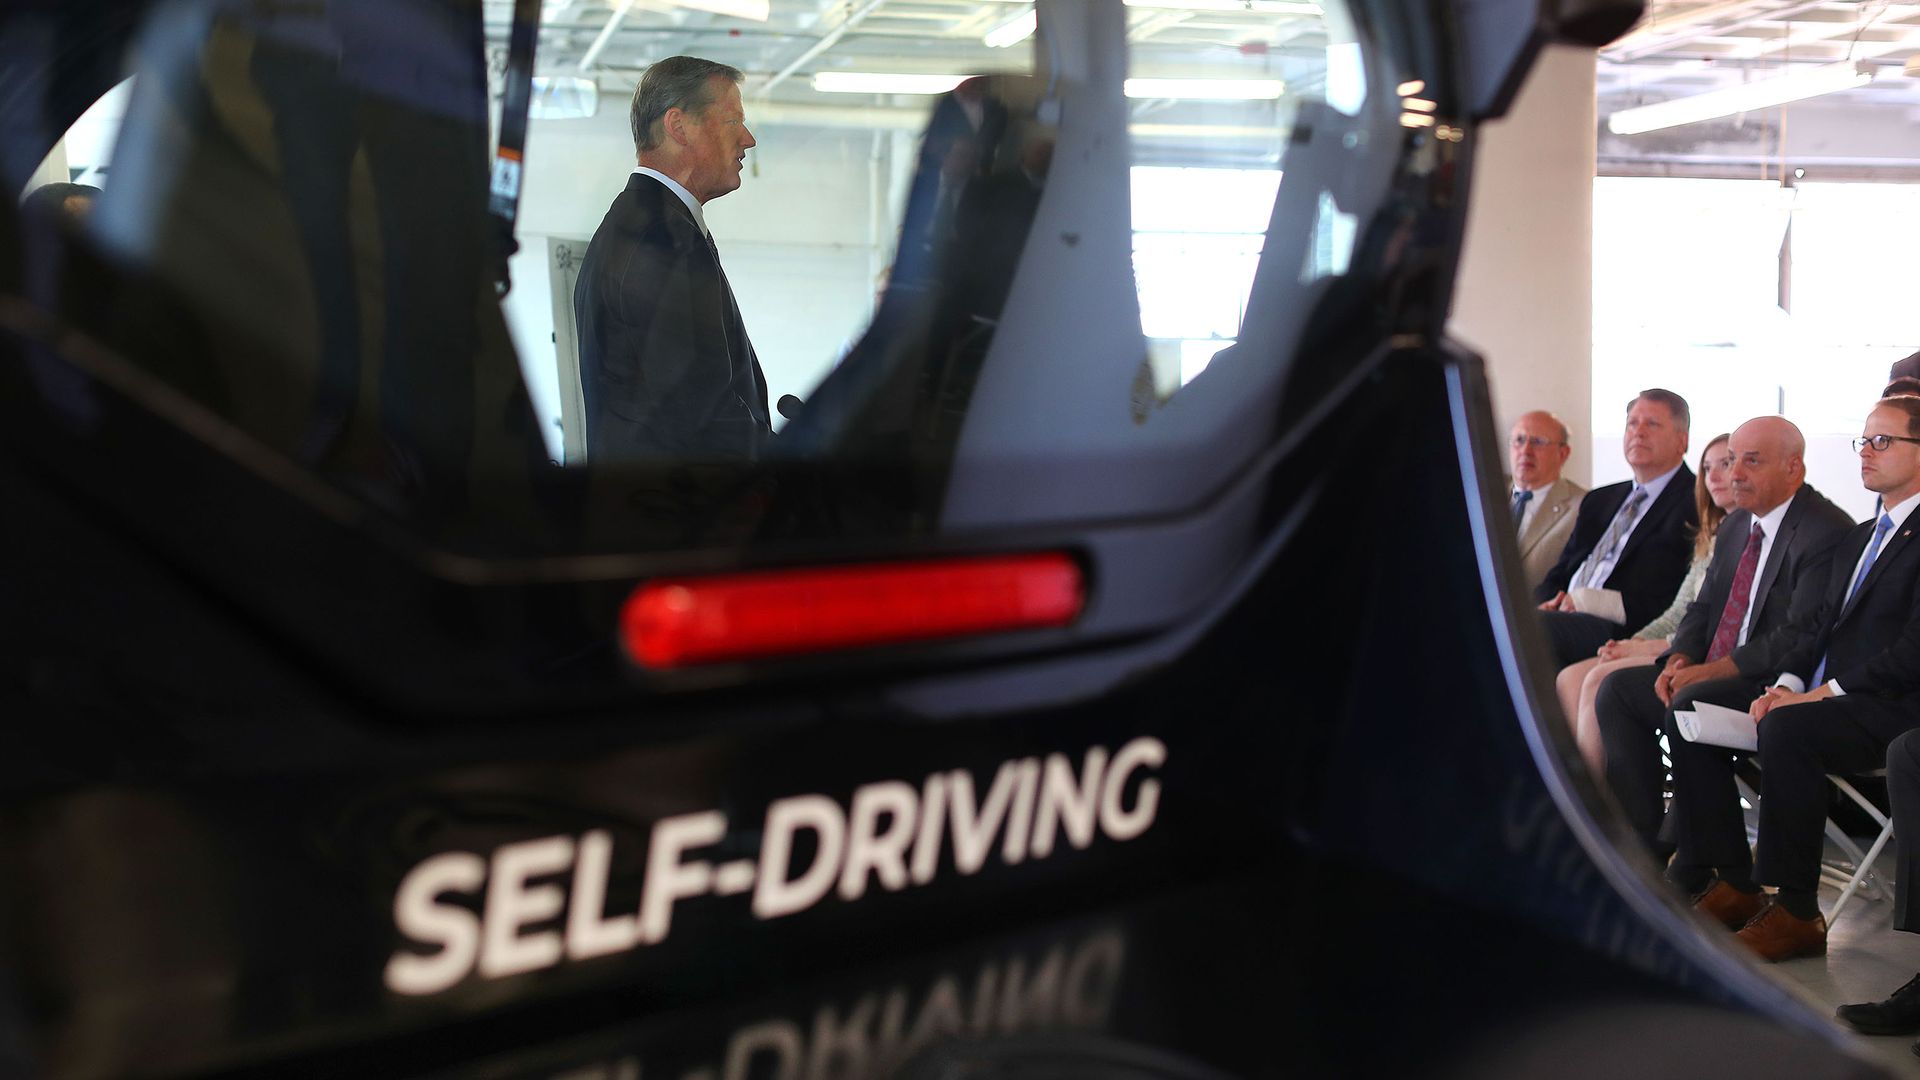 In this image, the words "self-driving" are seen on the back of a black car. 